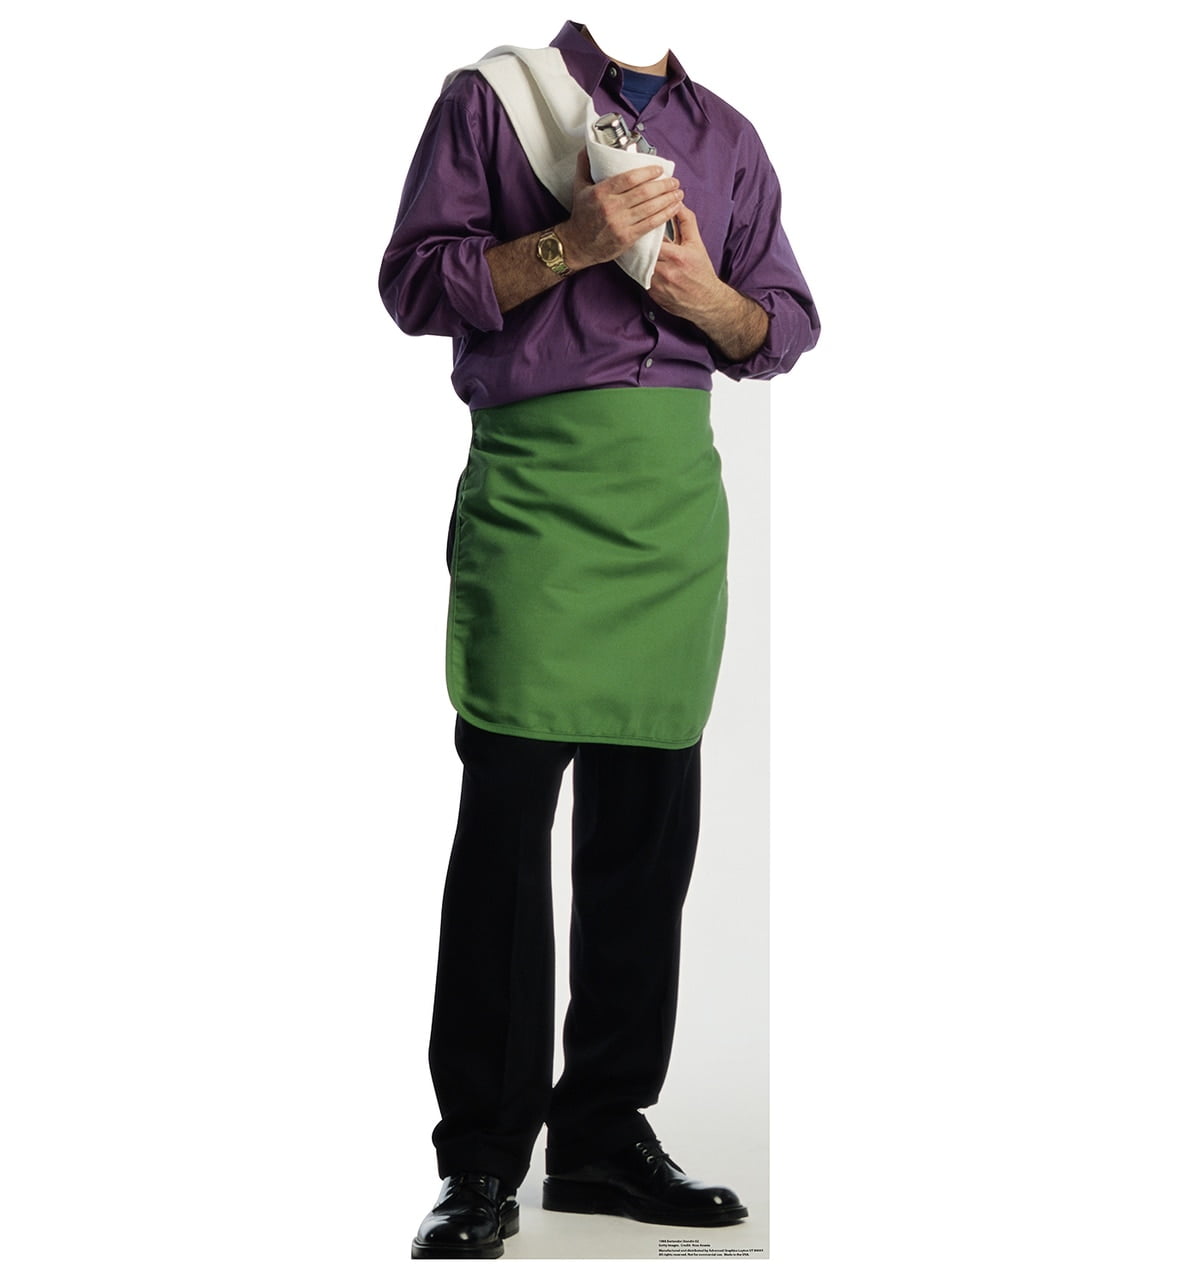 Picture of Advanced Graphics 1988 62 x 22 in. Green Apron Bartender Standin Cardboard Standup